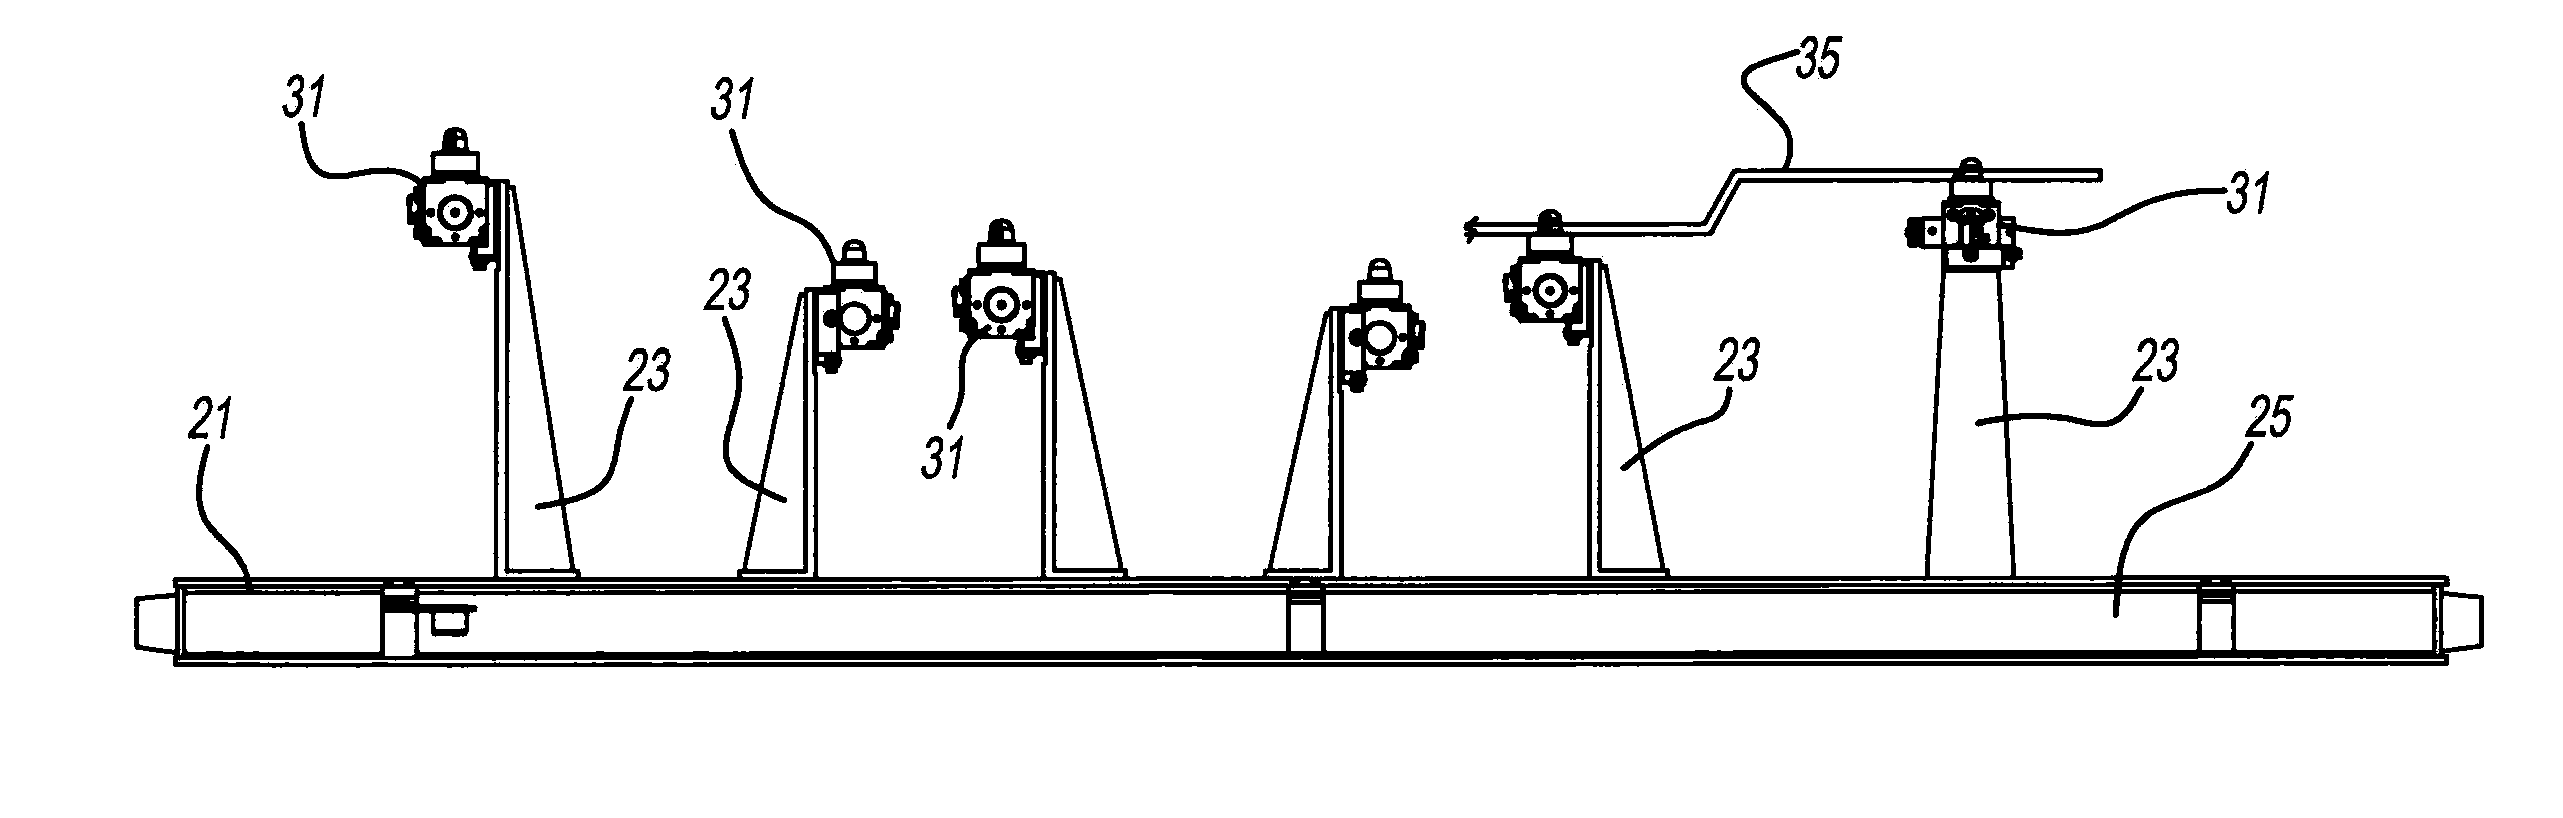 Clamp mounting system